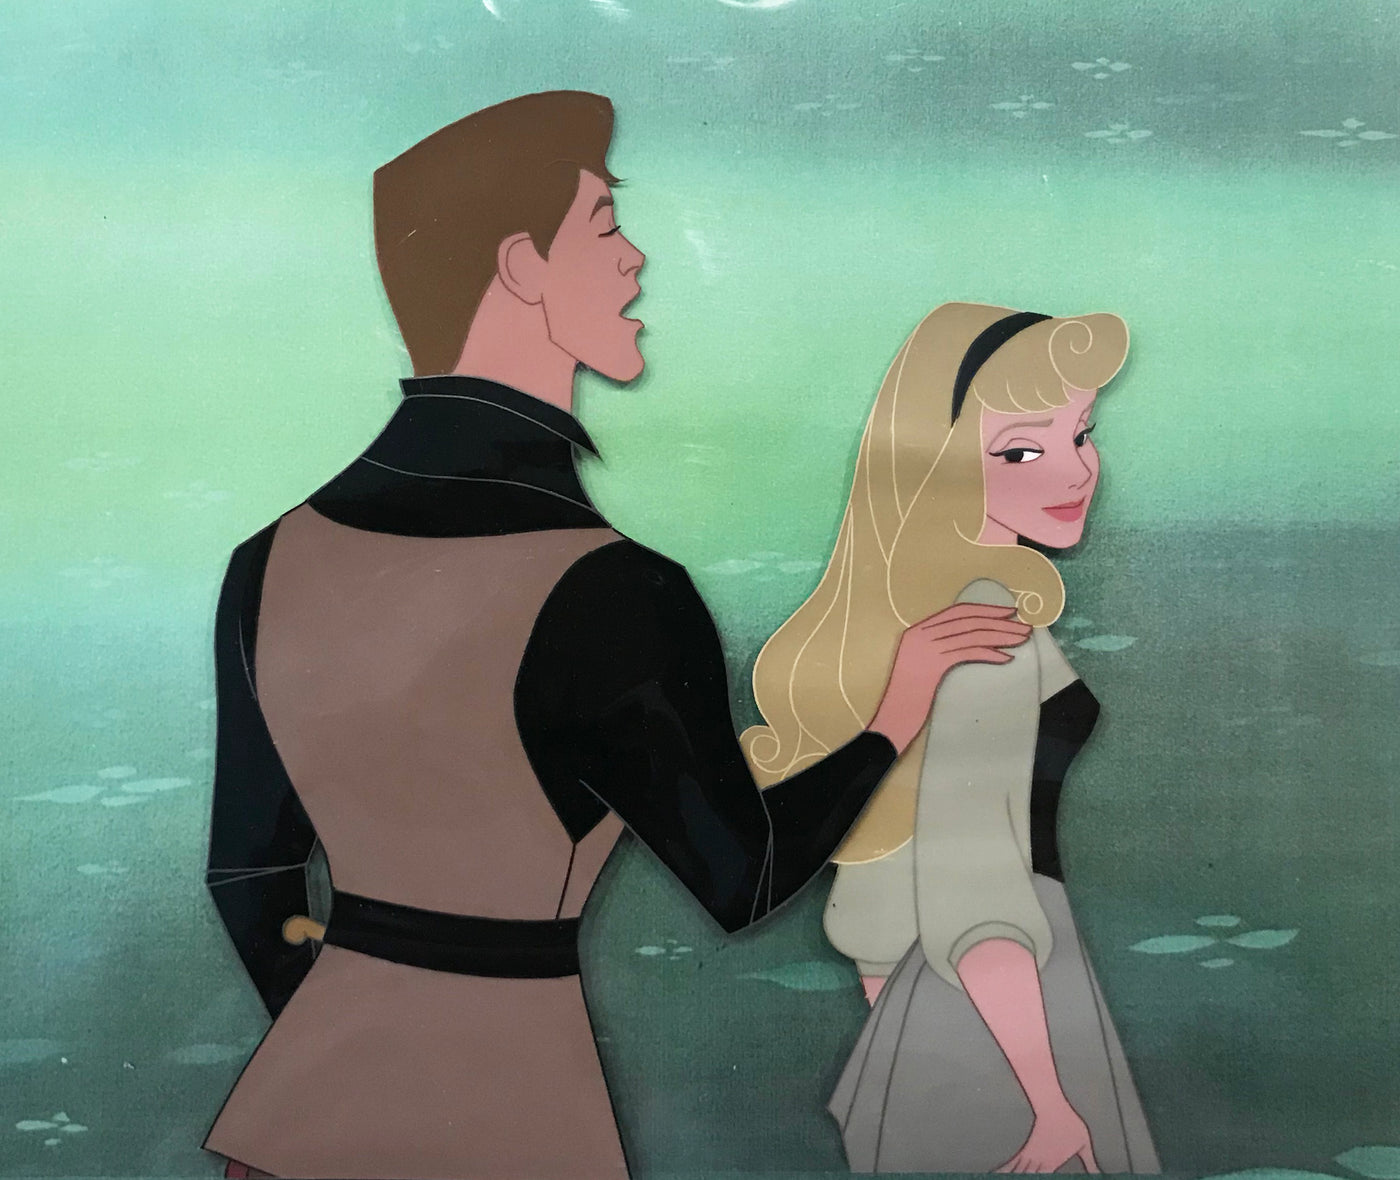 Original Disney Production Cel from Sleeping Beauty Featuring Briar Rose and Prince Phillip